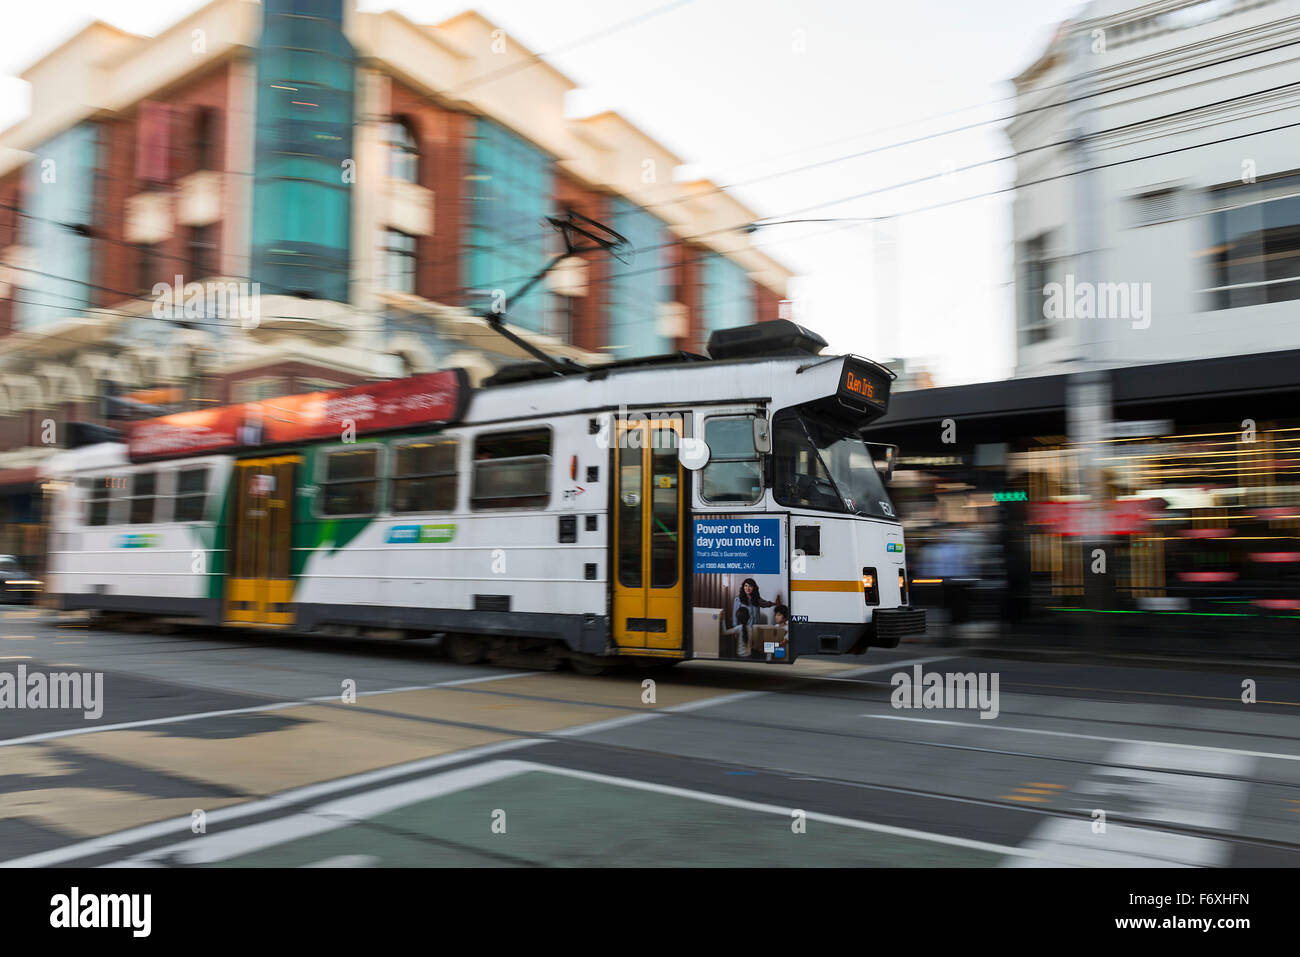 A Z3 class tram travels through intersection of High and Chapel Streets, Windsor, Melbourne Stock Photo